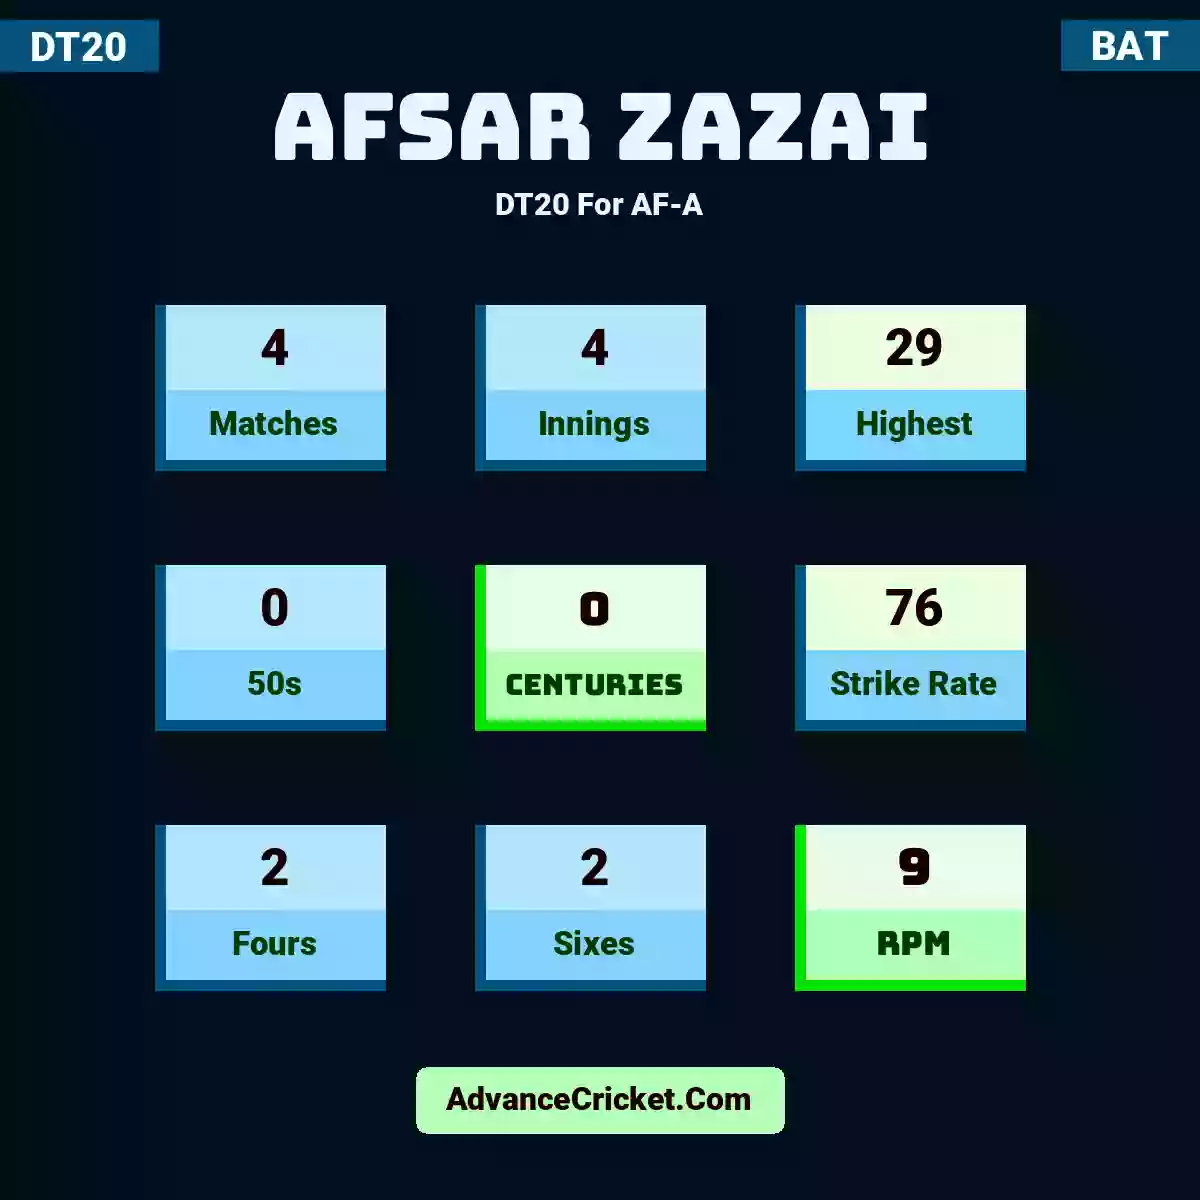 Afsar Zazai DT20  For AF-A, Afsar Zazai played 4 matches, scored 29 runs as highest, 0 half-centuries, and 0 centuries, with a strike rate of 76. A.Zazai hit 2 fours and 2 sixes, with an RPM of 9.